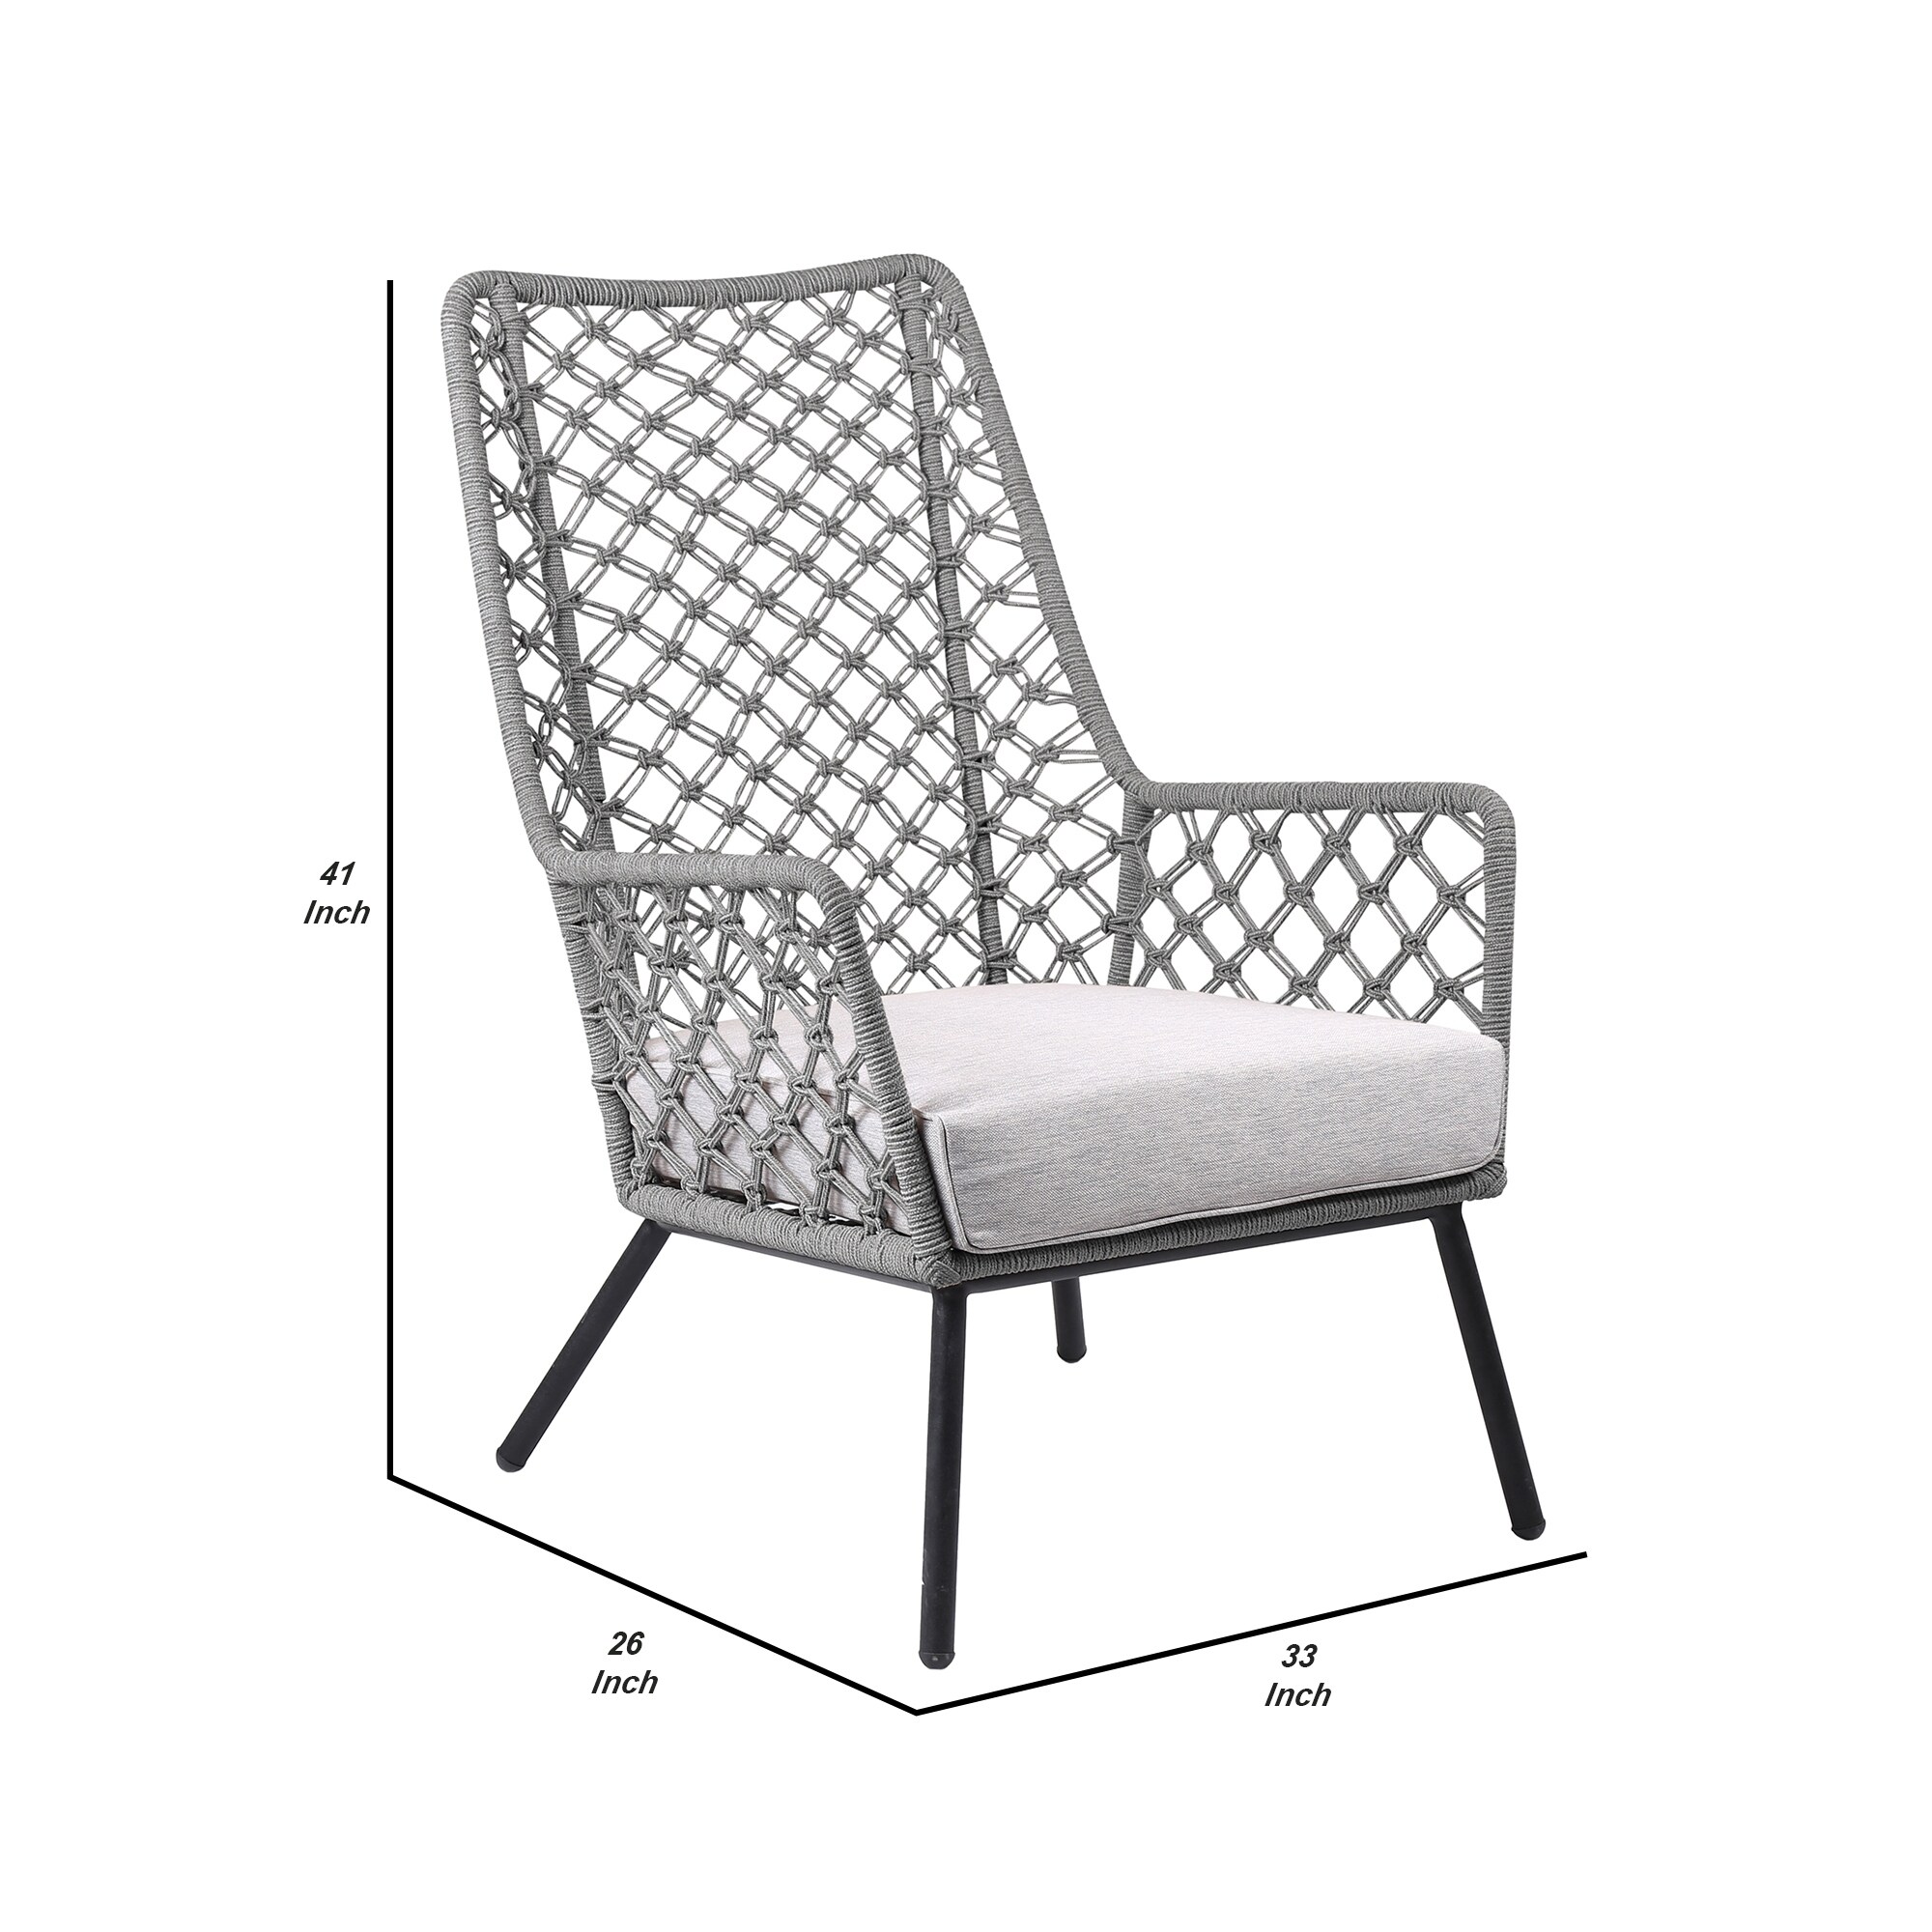 Indoor Outdoor Lounge Chair with Intricate Woven Lattice Back, Gray